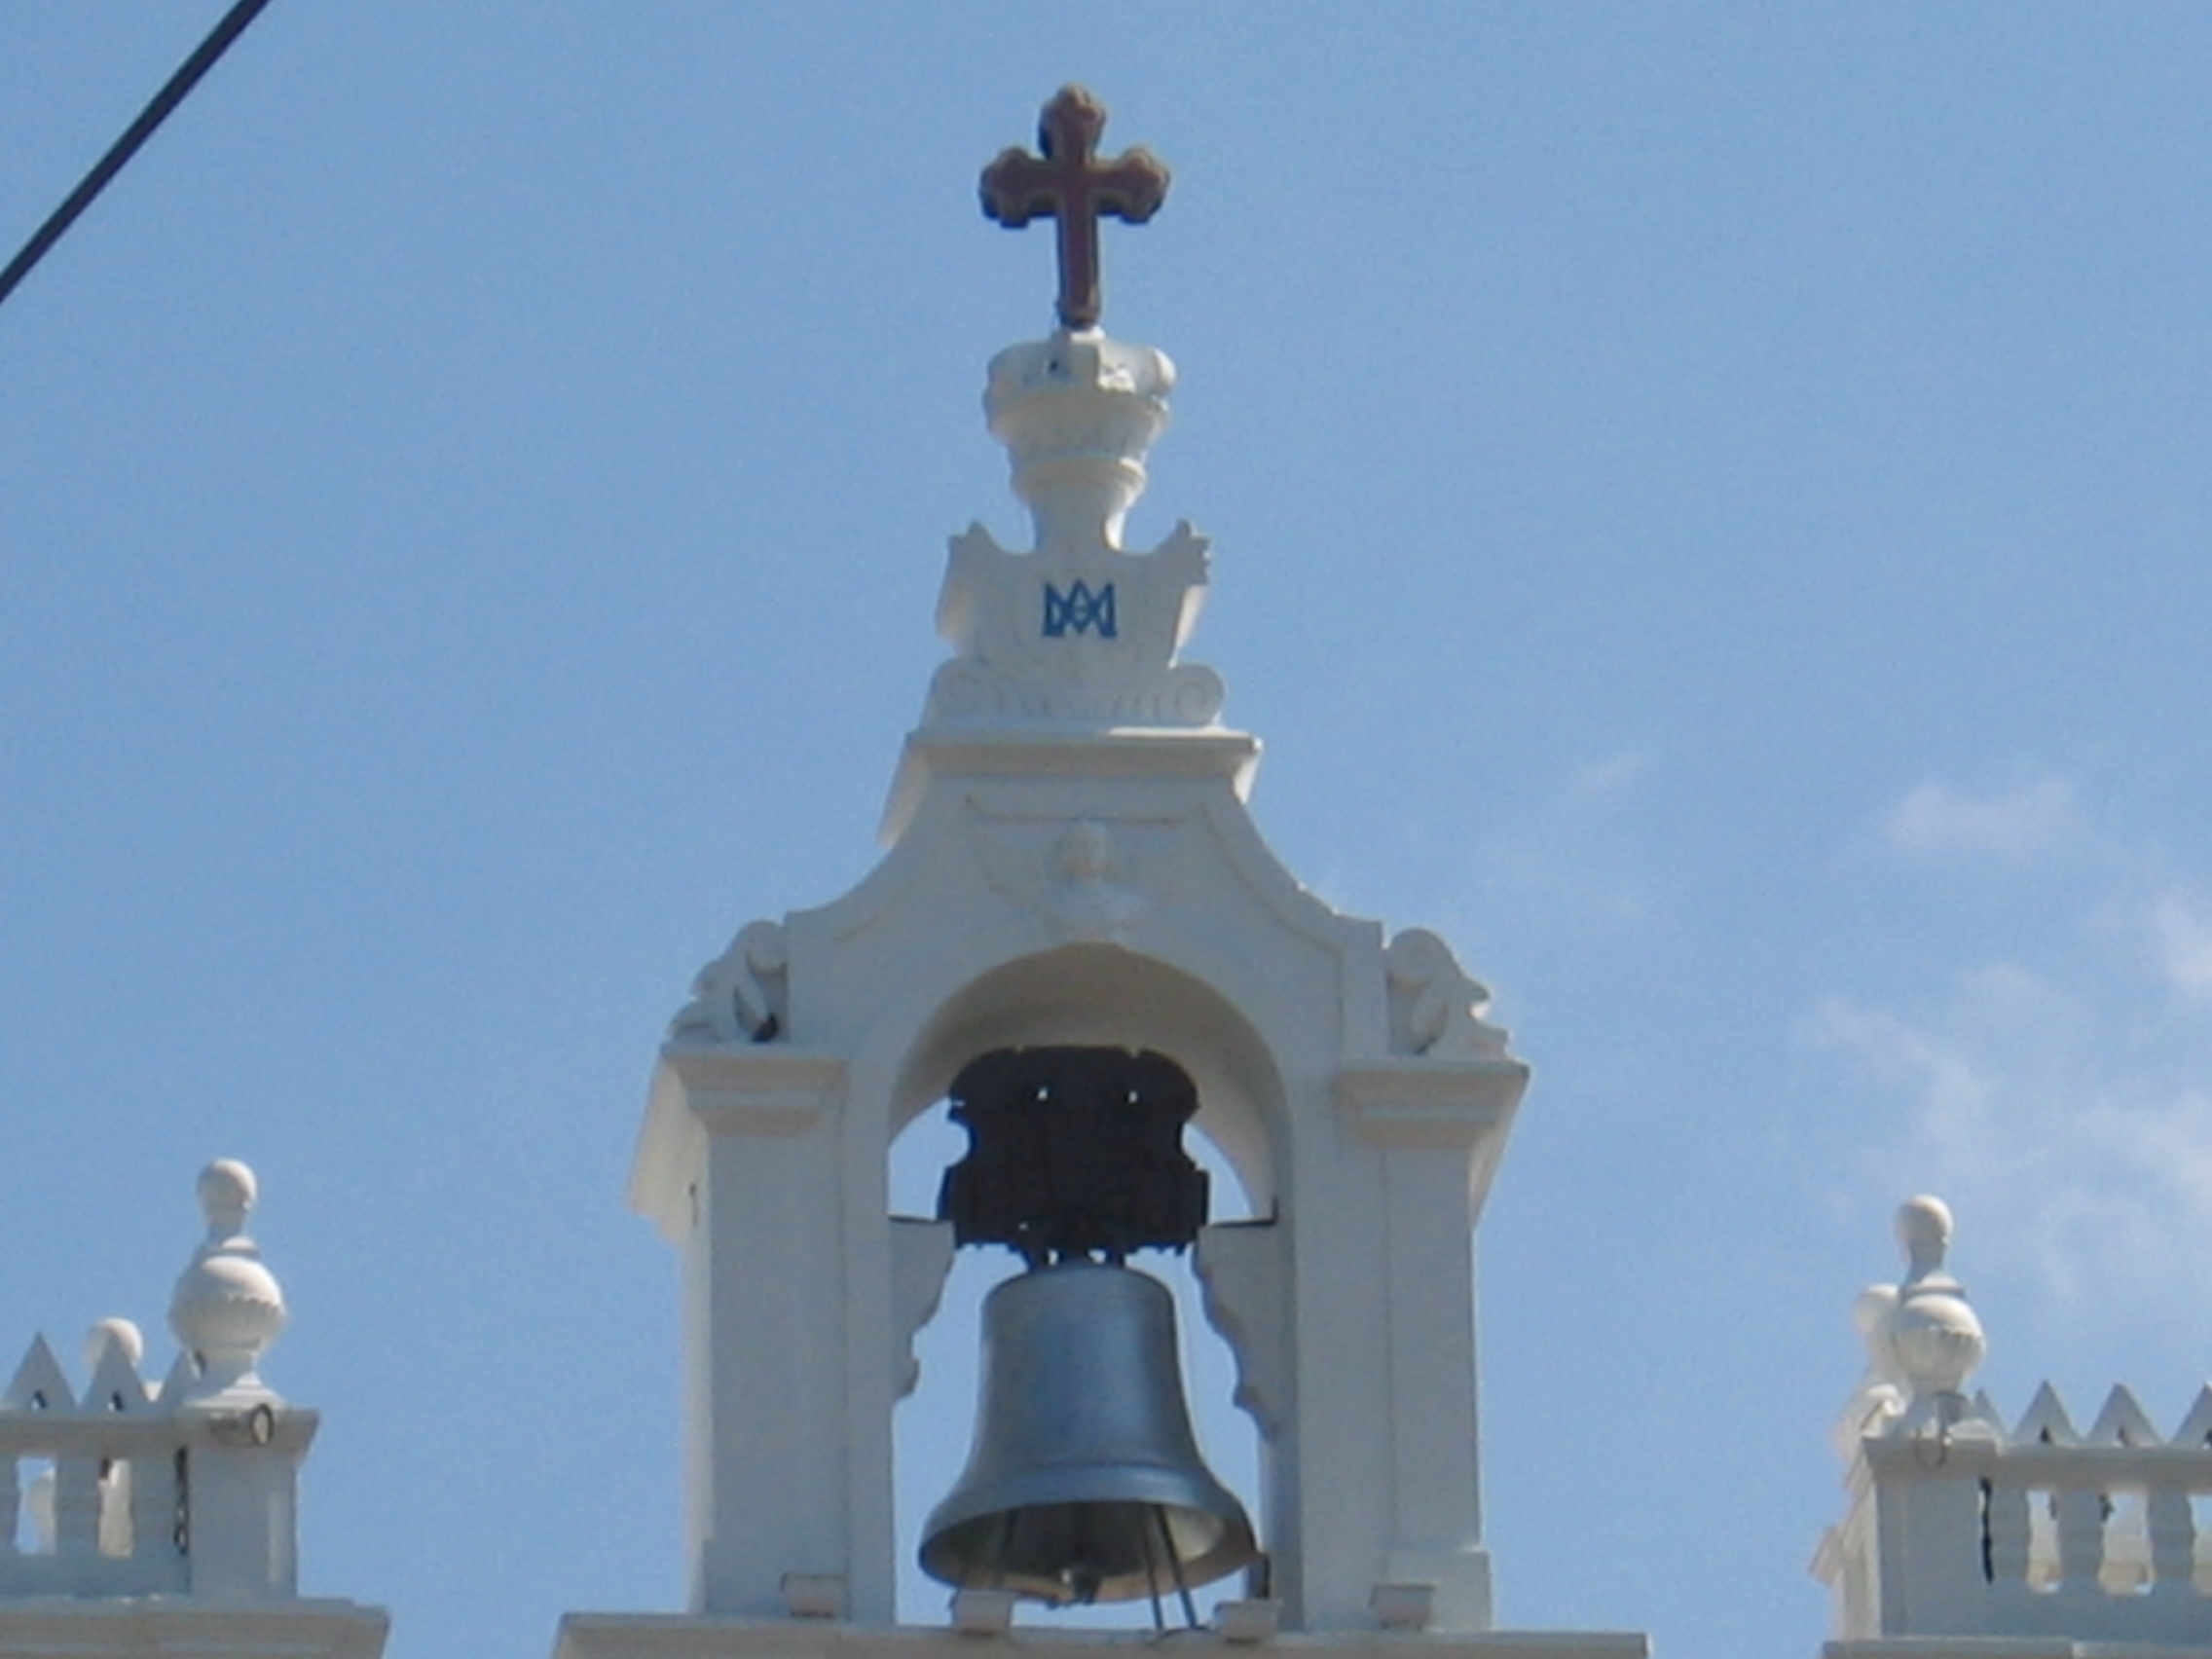 Church of Mary Immaculate Conception in Panjim, Goa